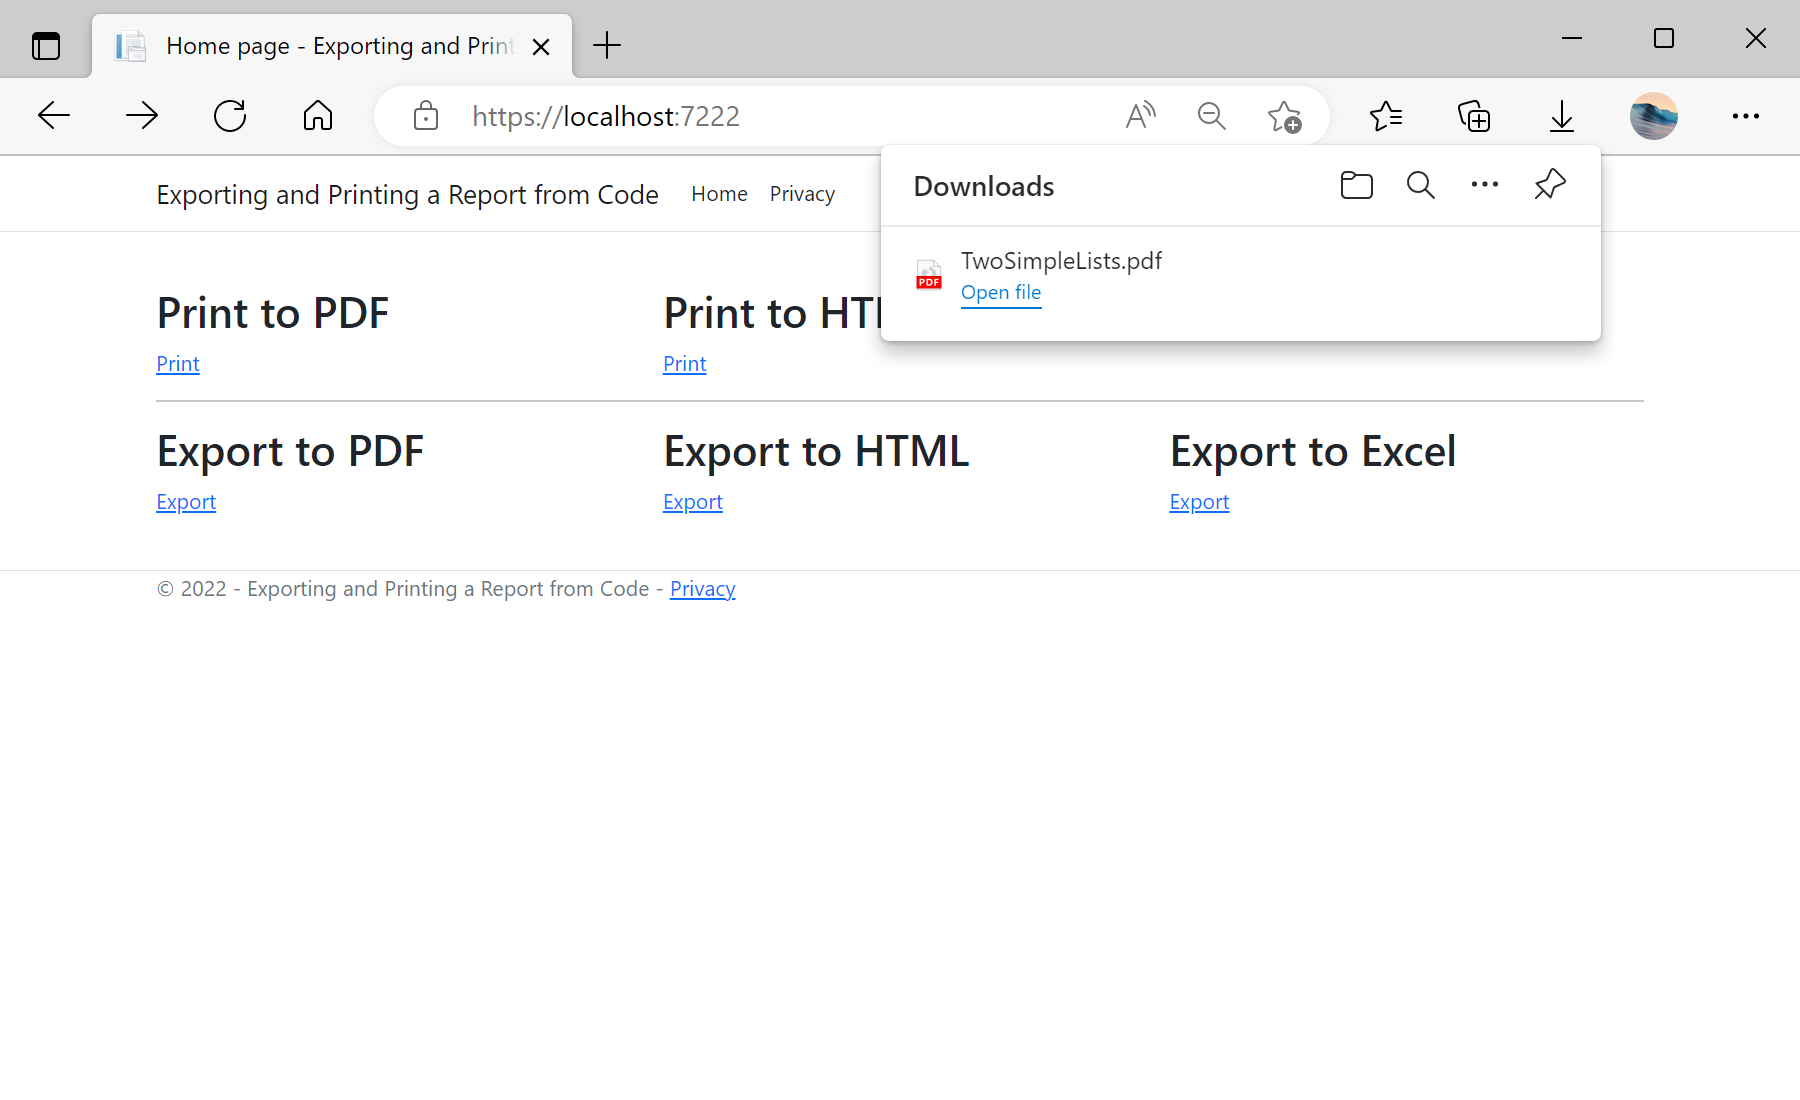 Exporting and Printing a Report from Code